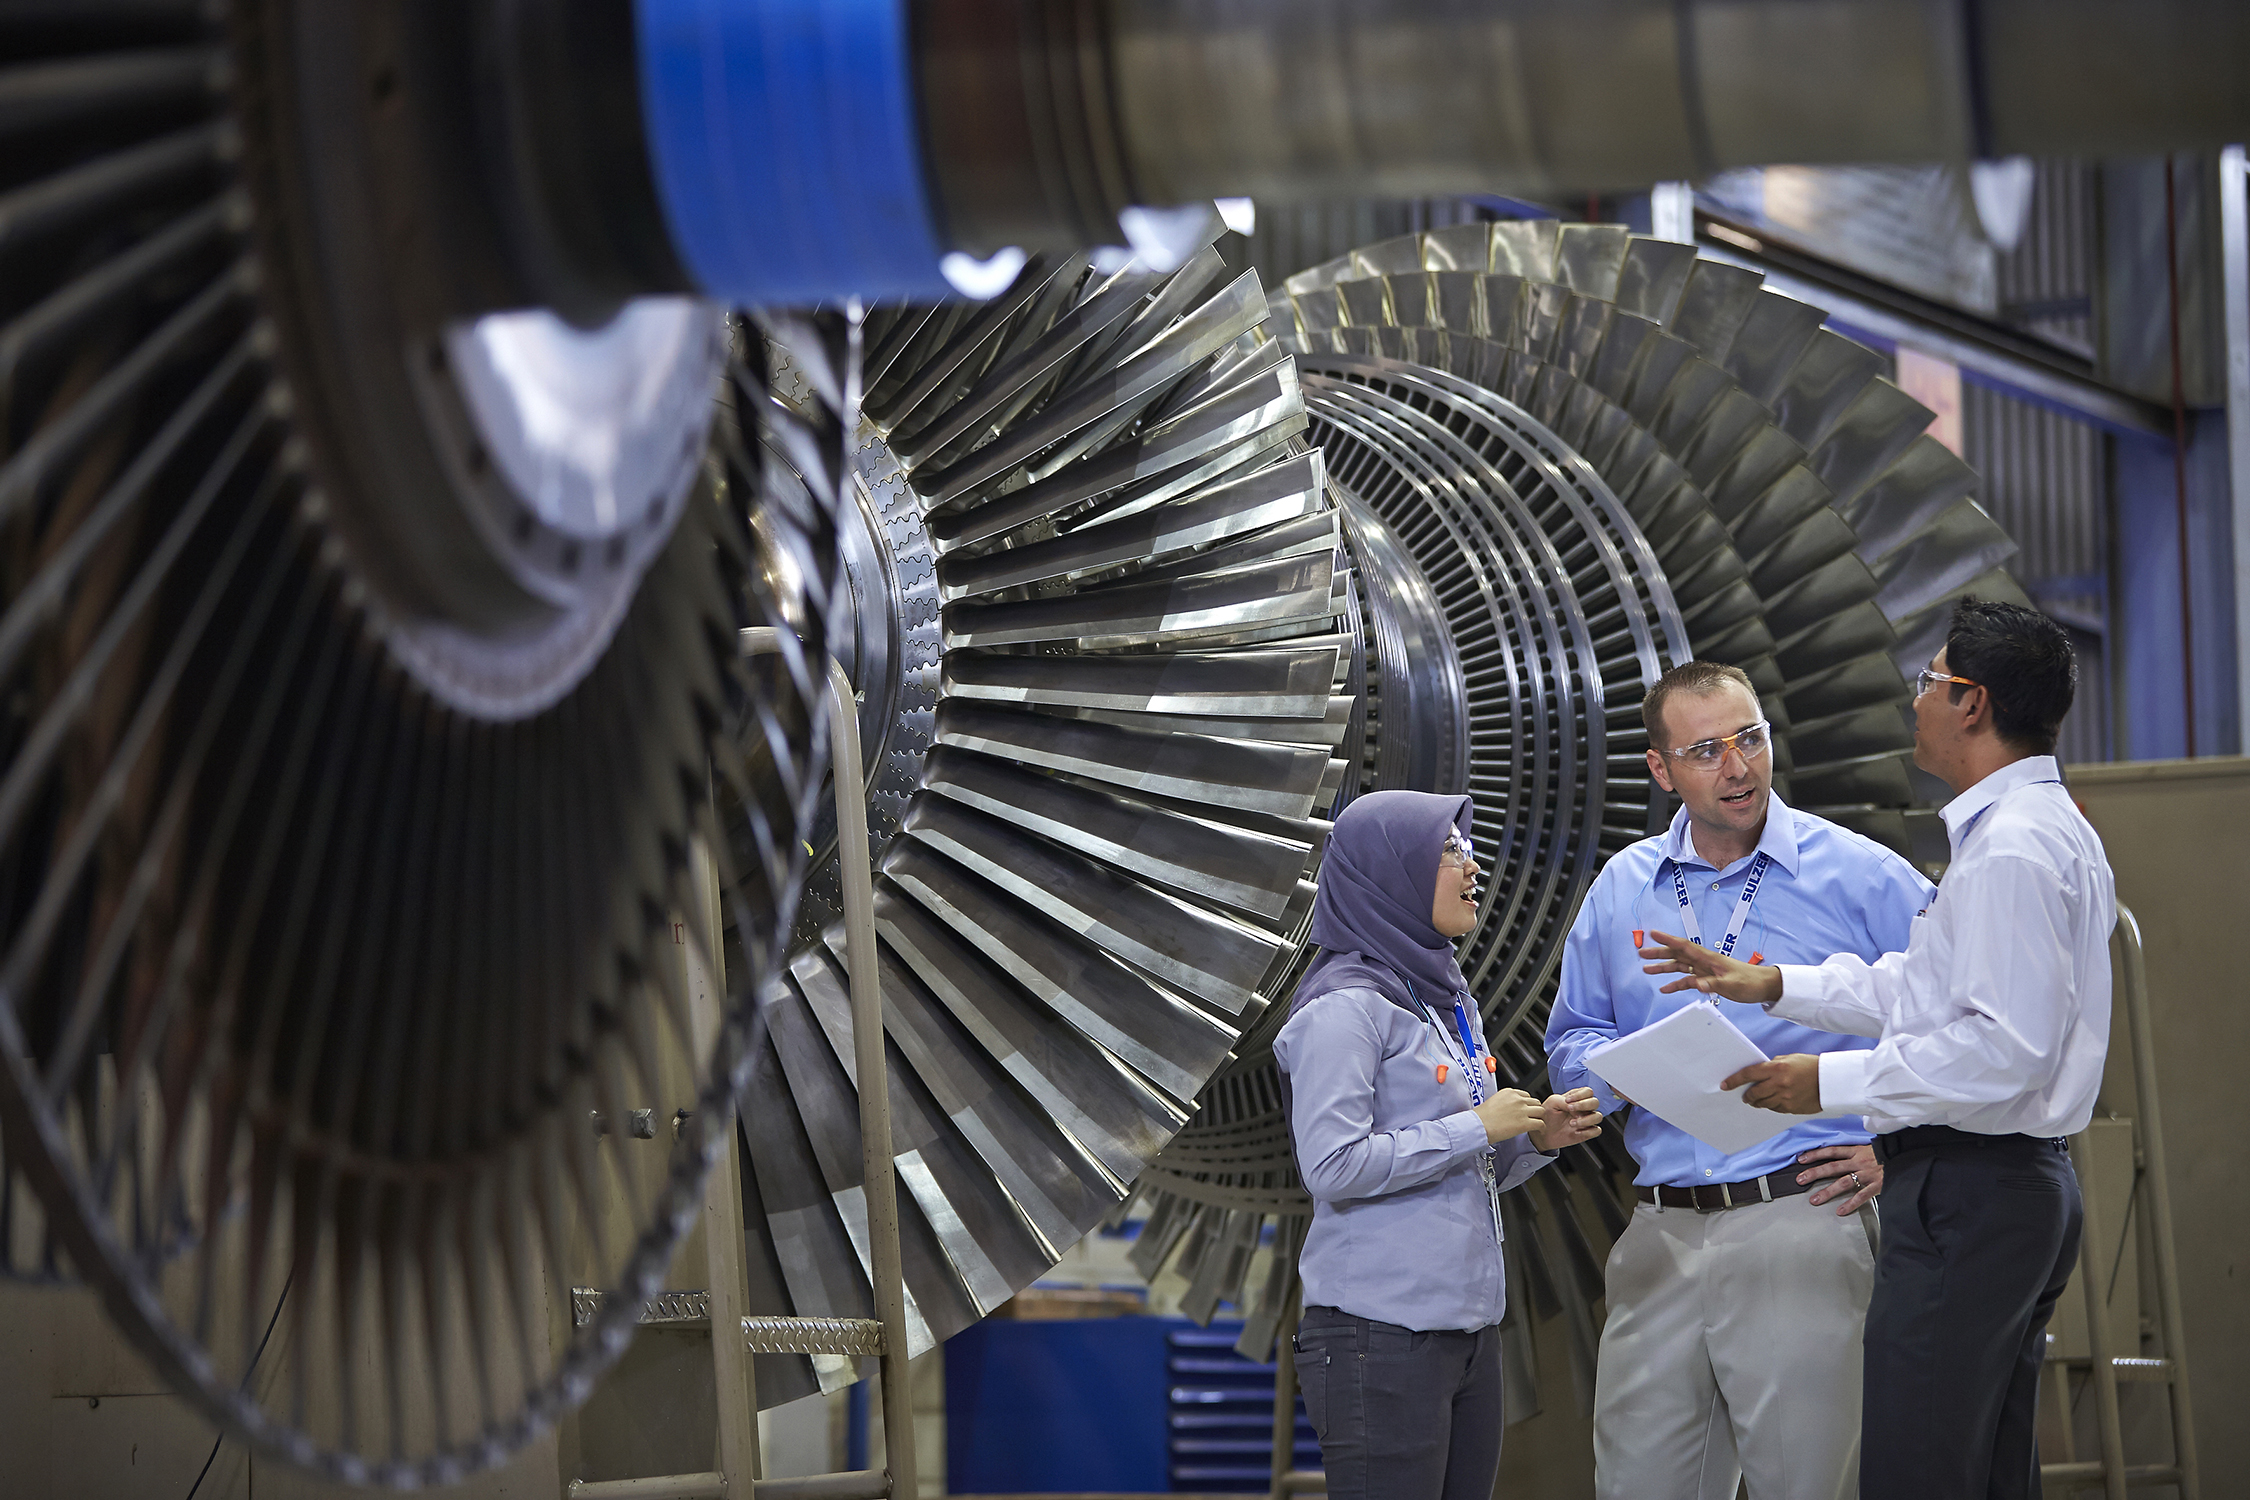 Over 2’000 successful turbomachinery overhaul projects have been delivered to customers in Asia by Sulzer